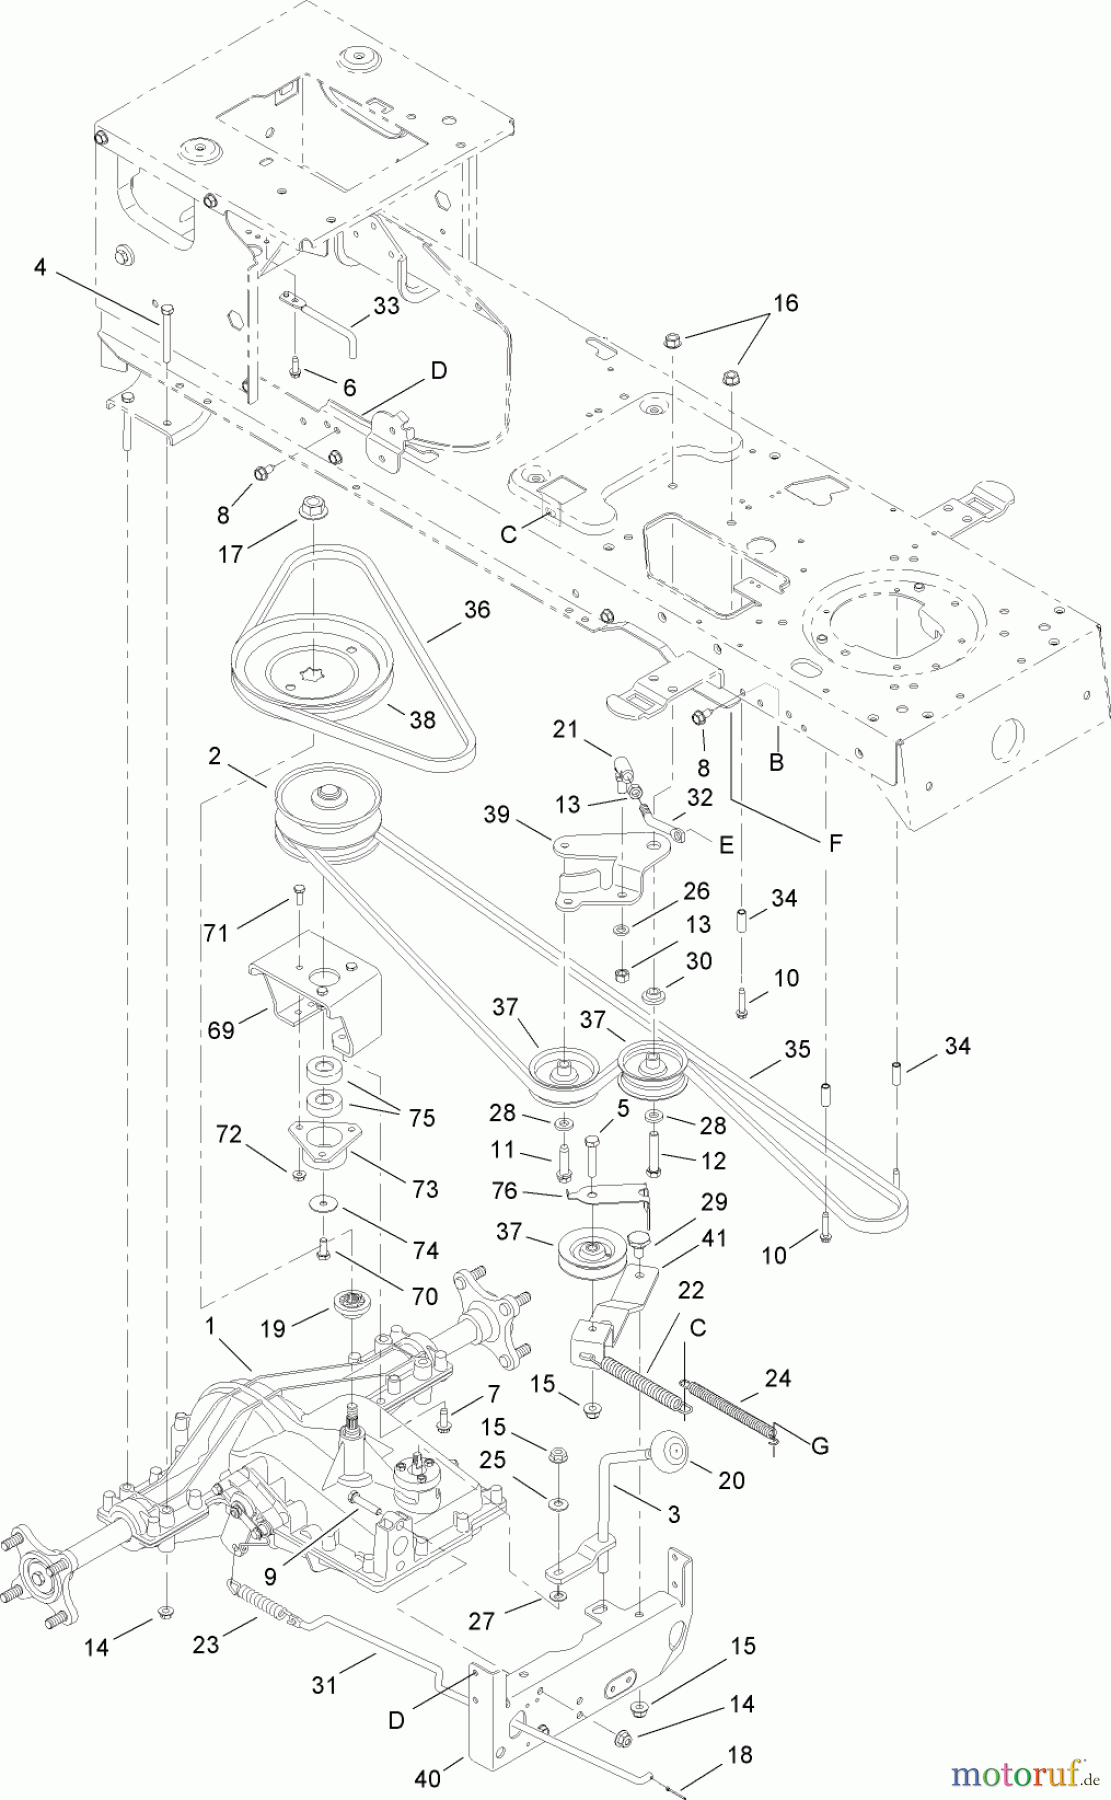  Toro Neu Mowers, Lawn & Garden Tractor Seite 1 14AP80RP544 (GT2100) - Toro GT2100 Garden Tractor, 2006 (1A136H30000-) TRANSMISSION, BELT AND PULLEY ASSEMBLY